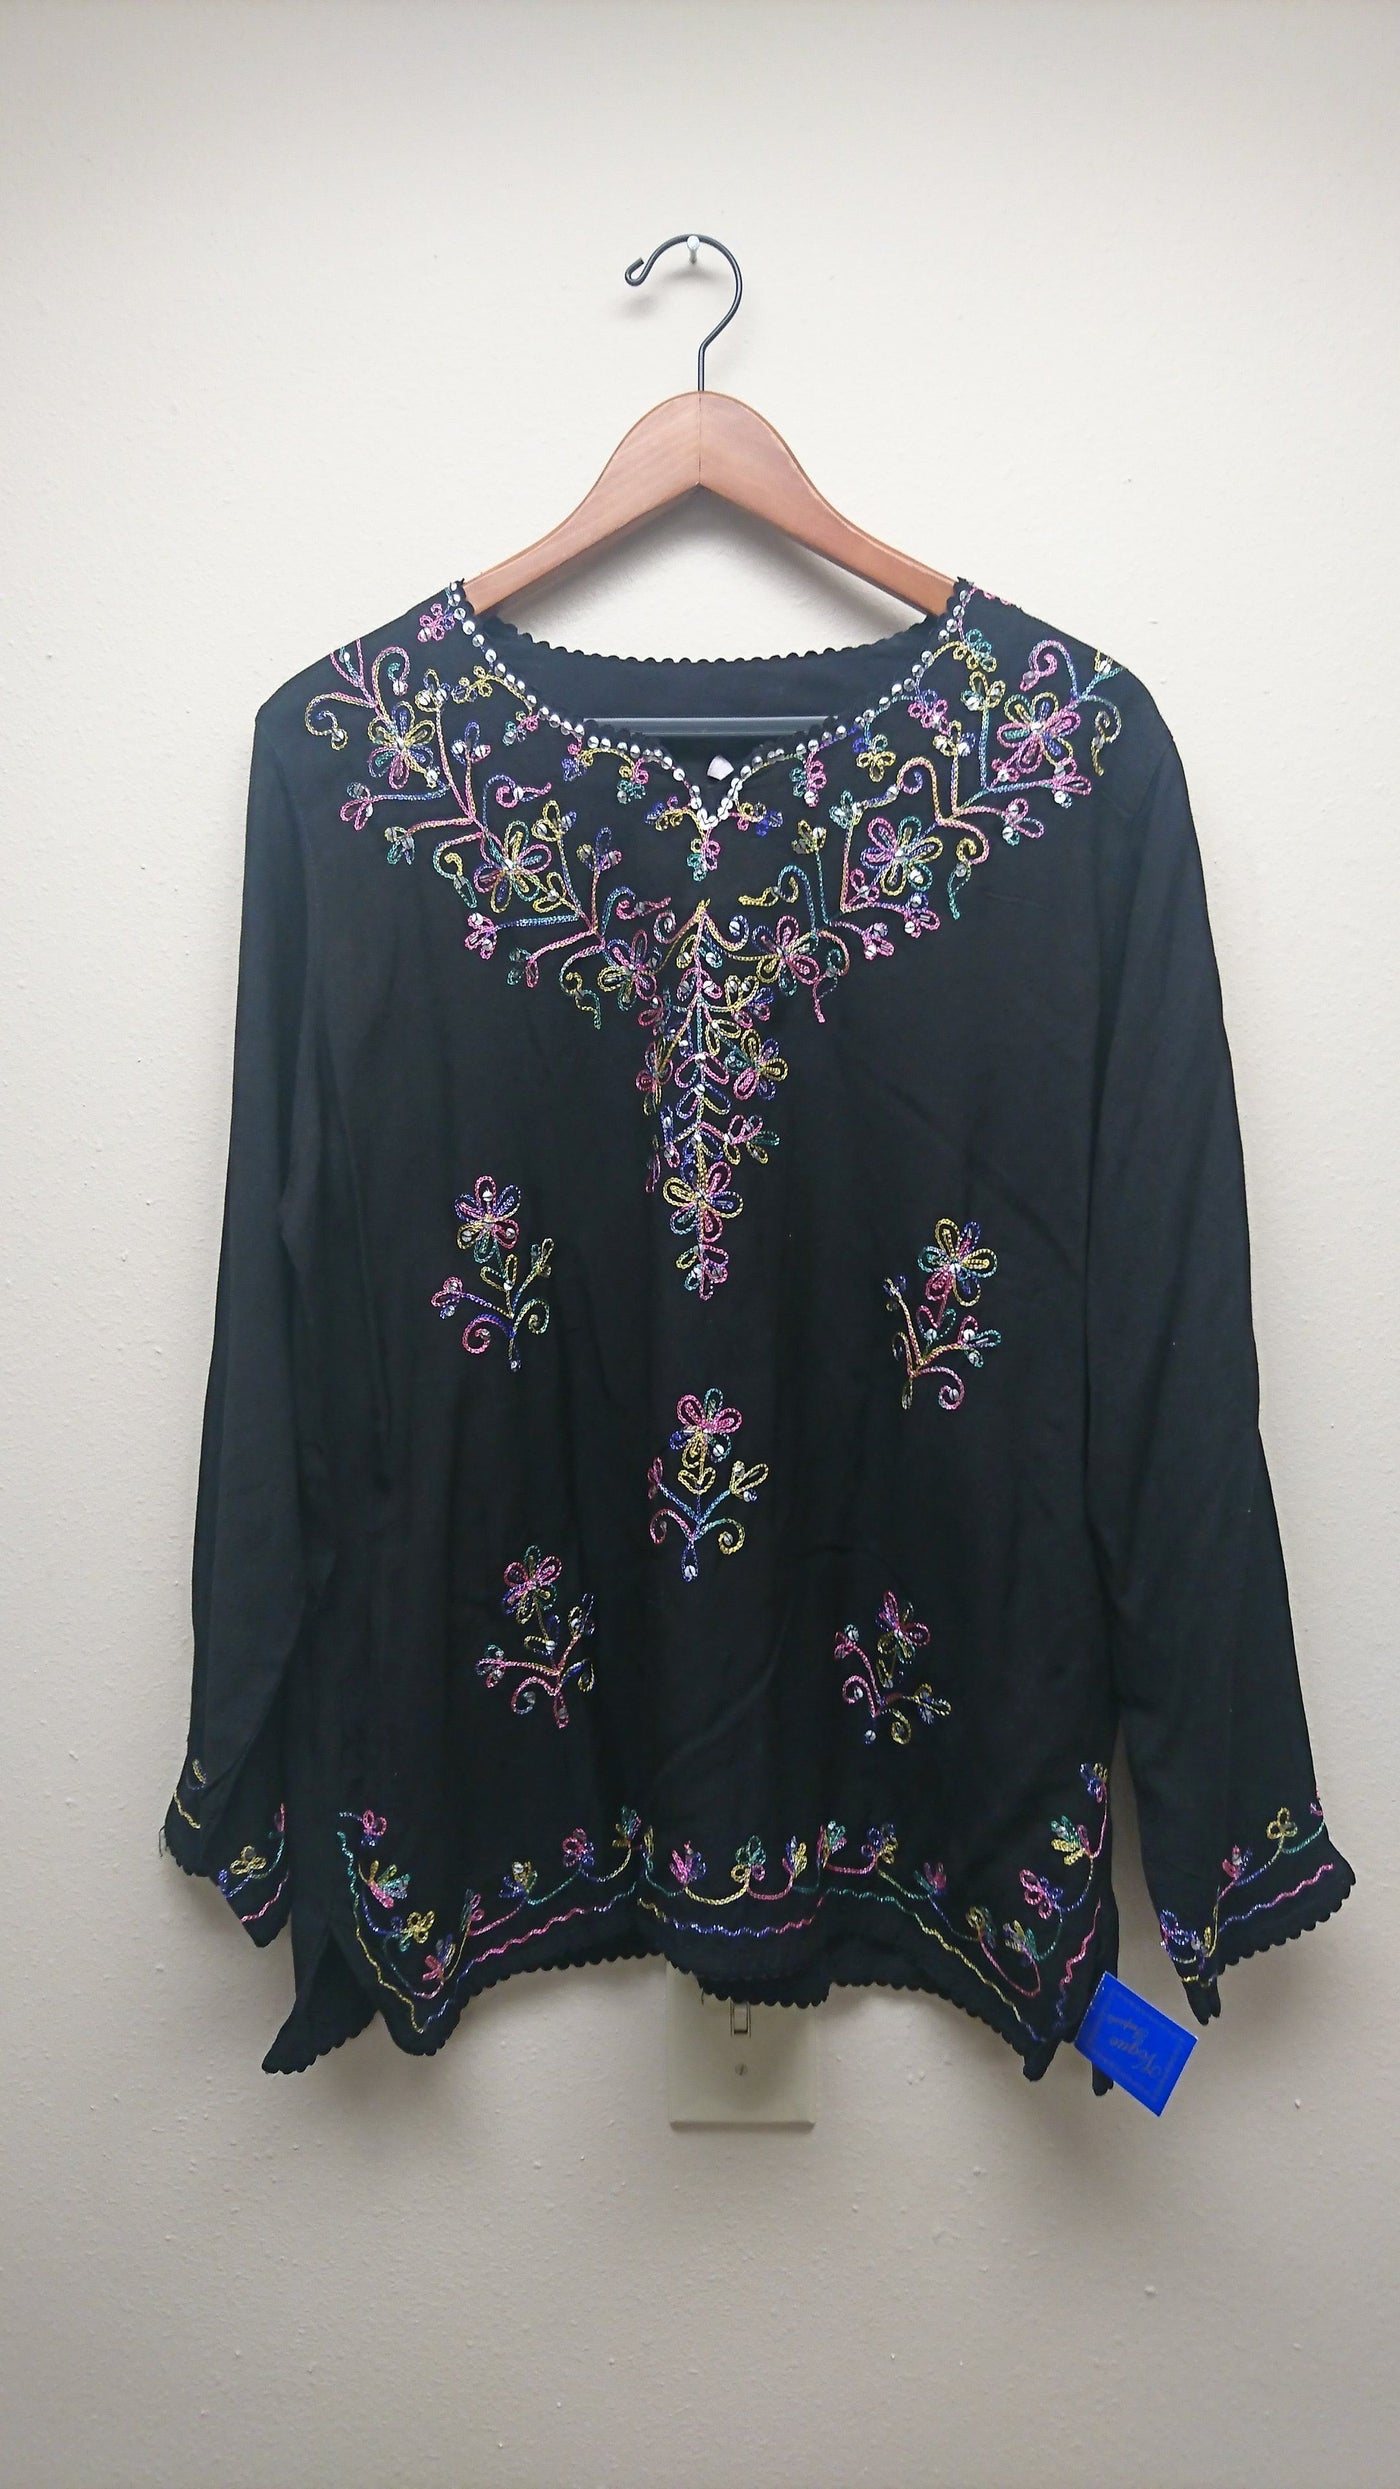 Kurti Blouse Top in Black - Indian Clothing in Denver, CO, Aurora, CO, Boulder, CO, Fort Collins, CO, Colorado Springs, CO, Parker, CO, Highlands Ranch, CO, Cherry Creek, CO, Centennial, CO, and Longmont, CO. Nationwide shipping USA - India Fashion X